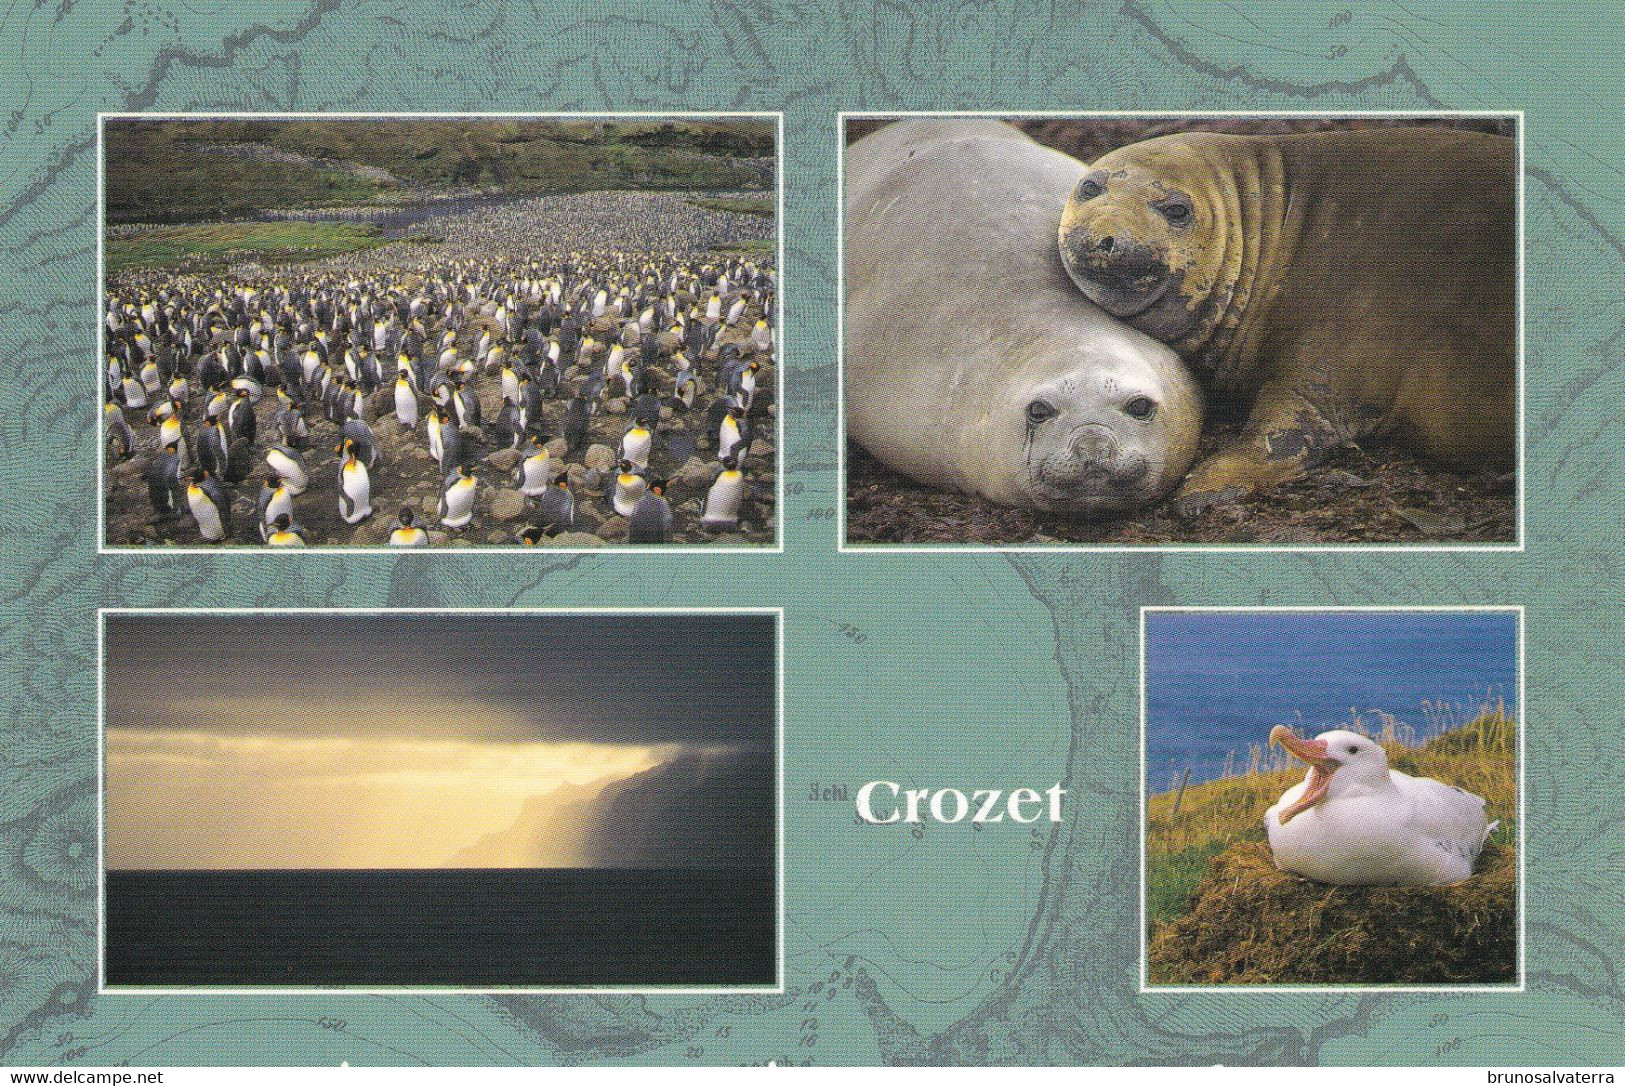 TERRES AUSTRALES ET ANTARCTIQUES FRANCAISES - Crozet - TAAF : French Southern And Antarctic Lands